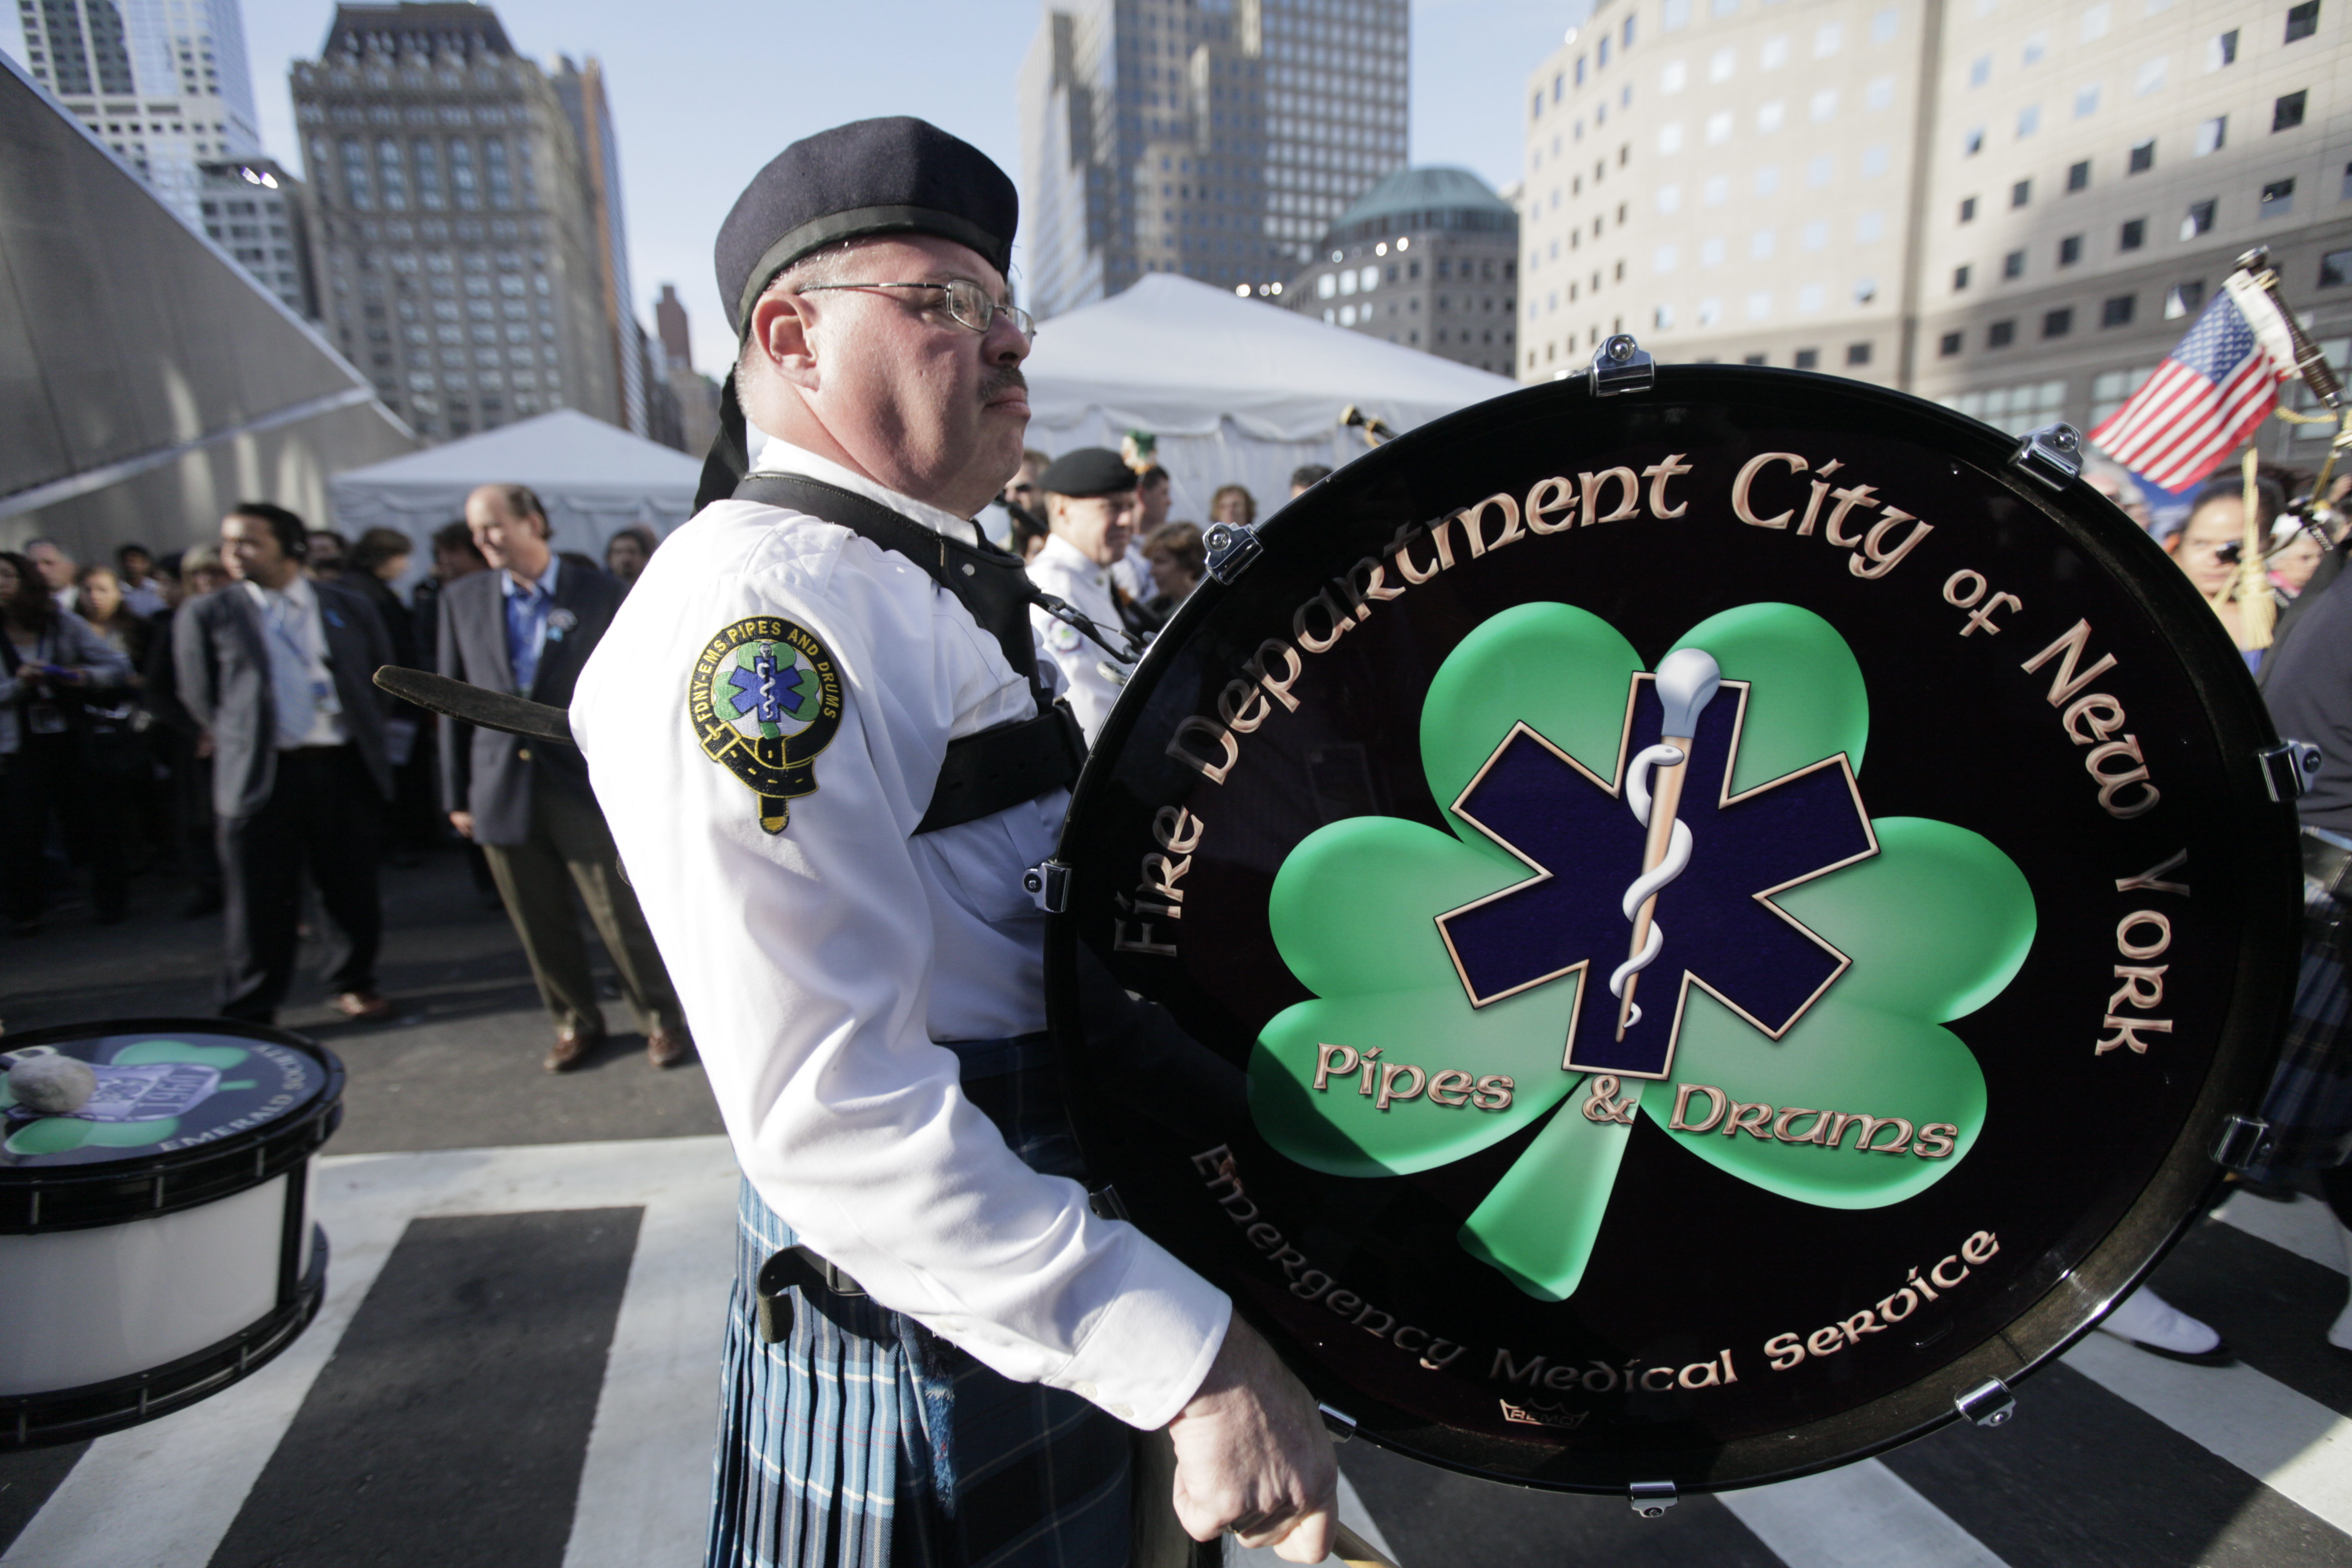 Members of the FDNY Emerald Society Pipes and Drums band play at the 9/11 Memorial during an event. White tents and groups of people are visible in the background.